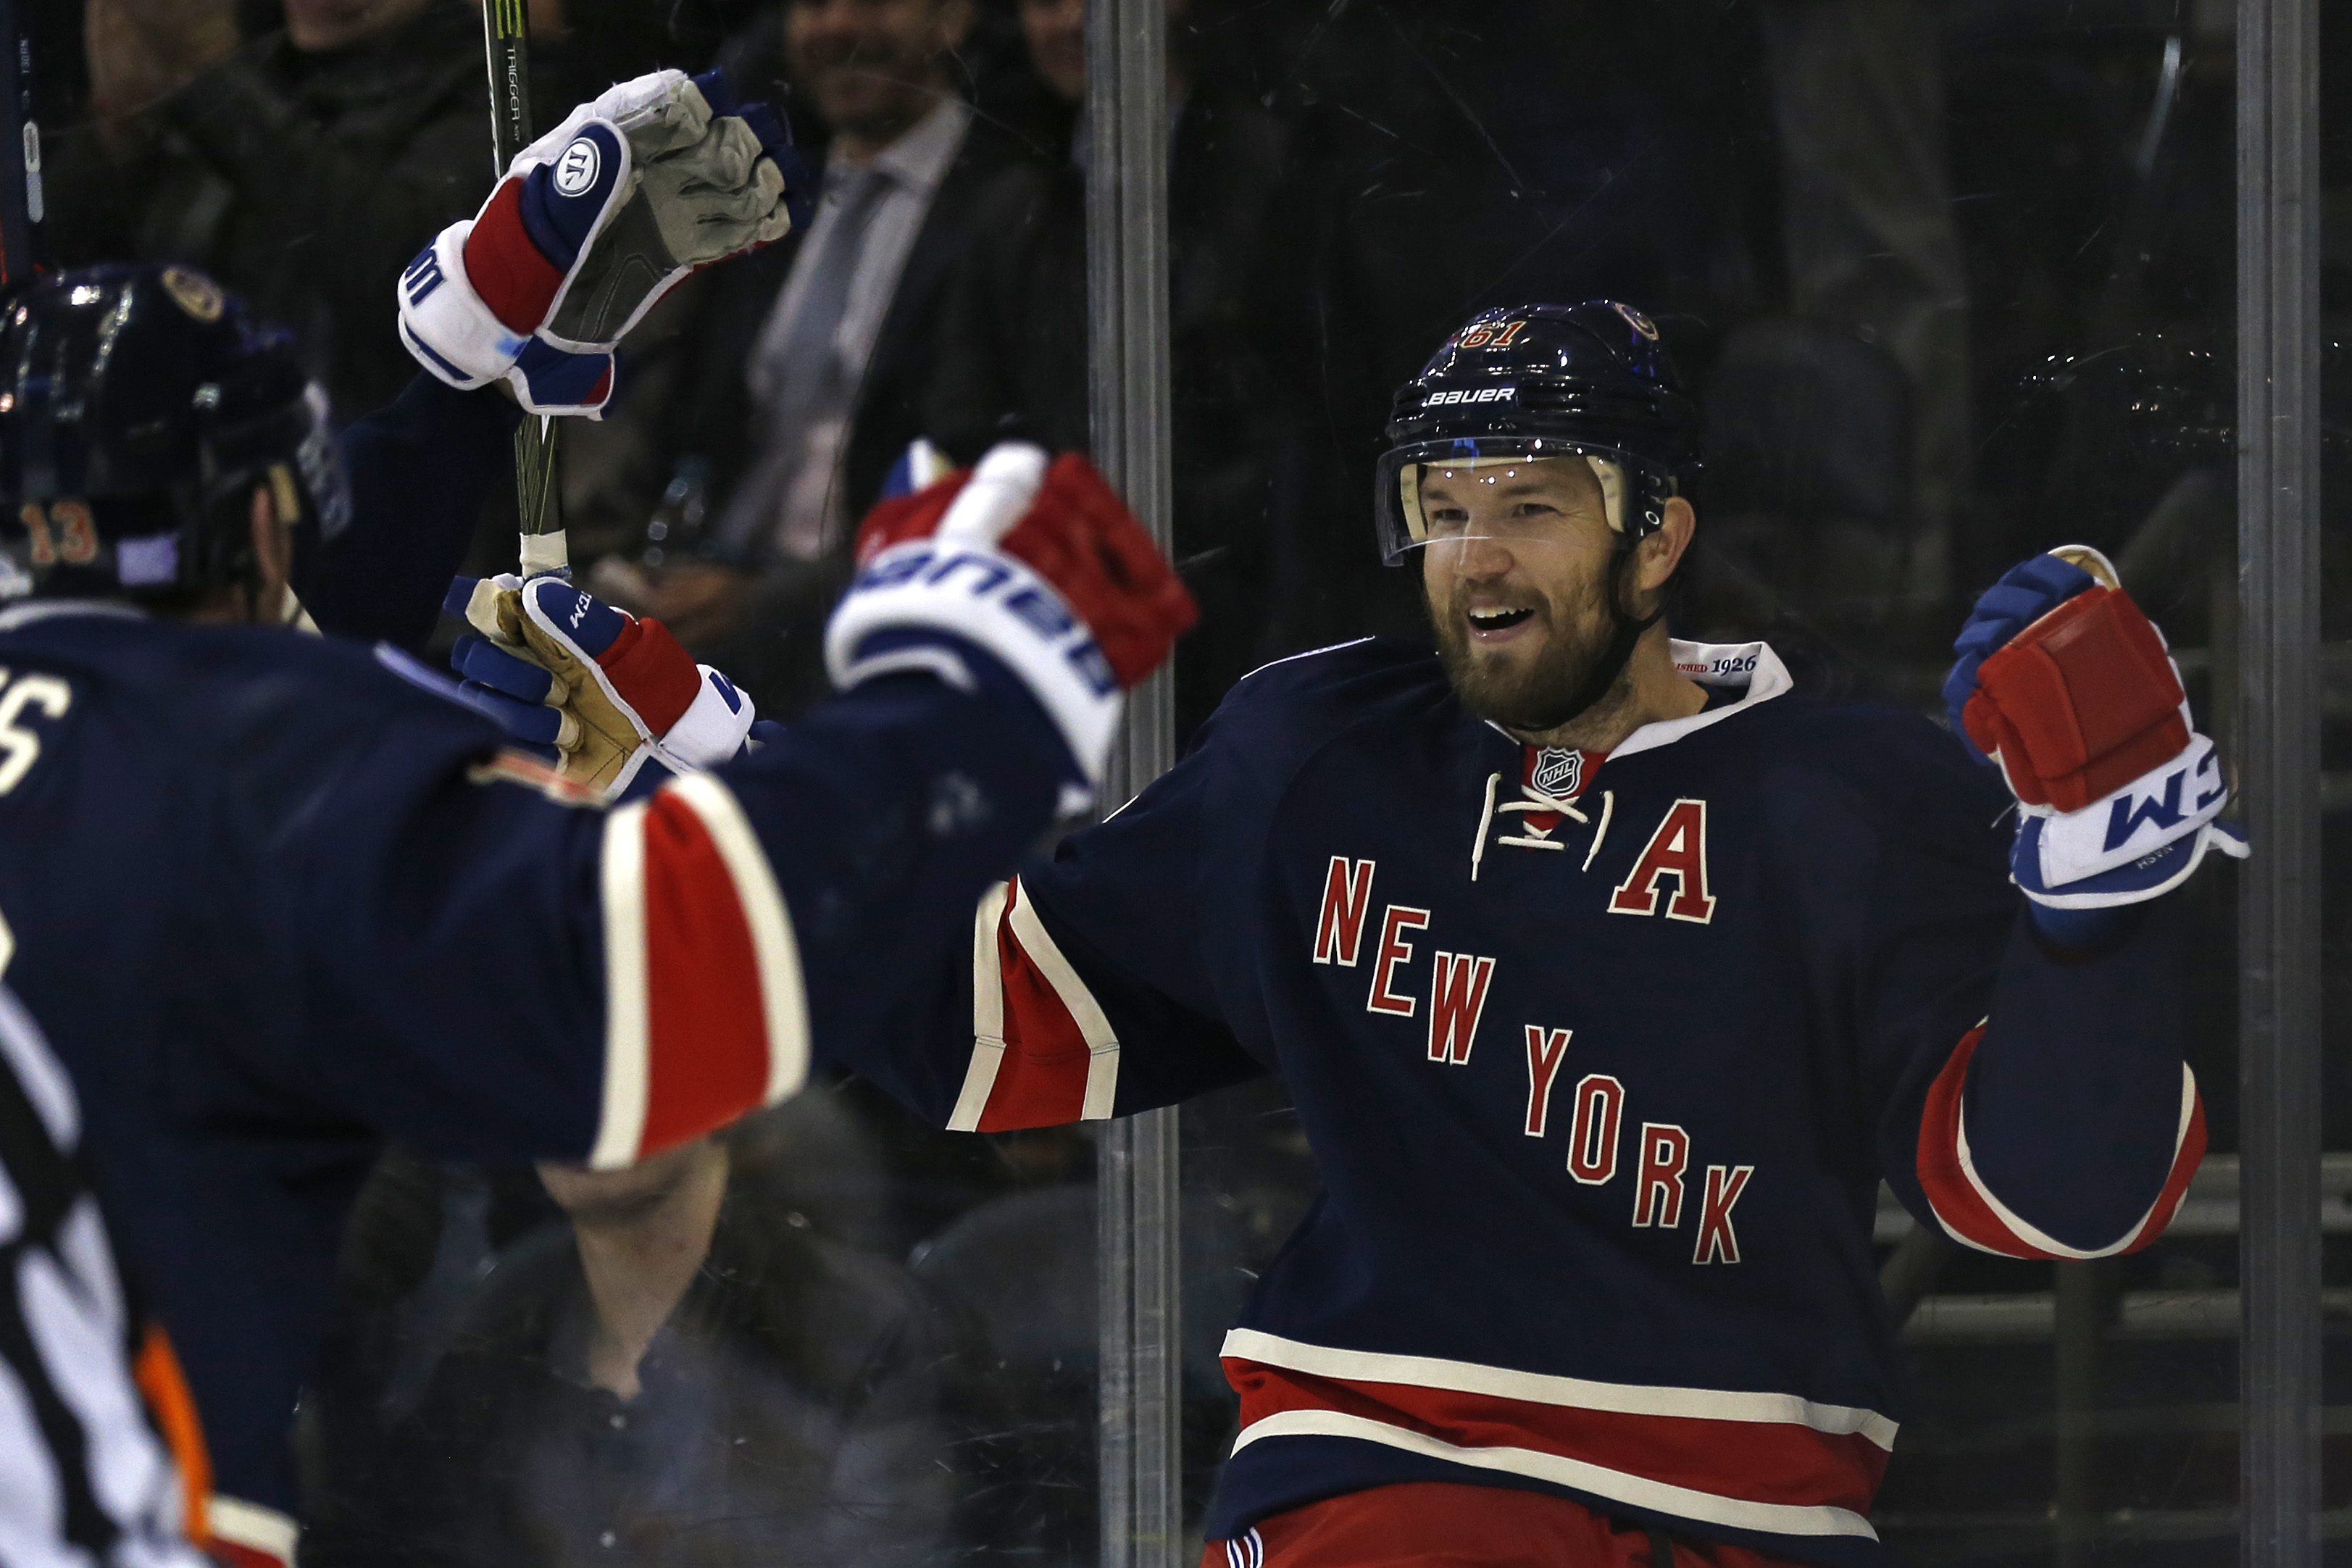 New York Rangers Vs. Carolina: What To Watch For 